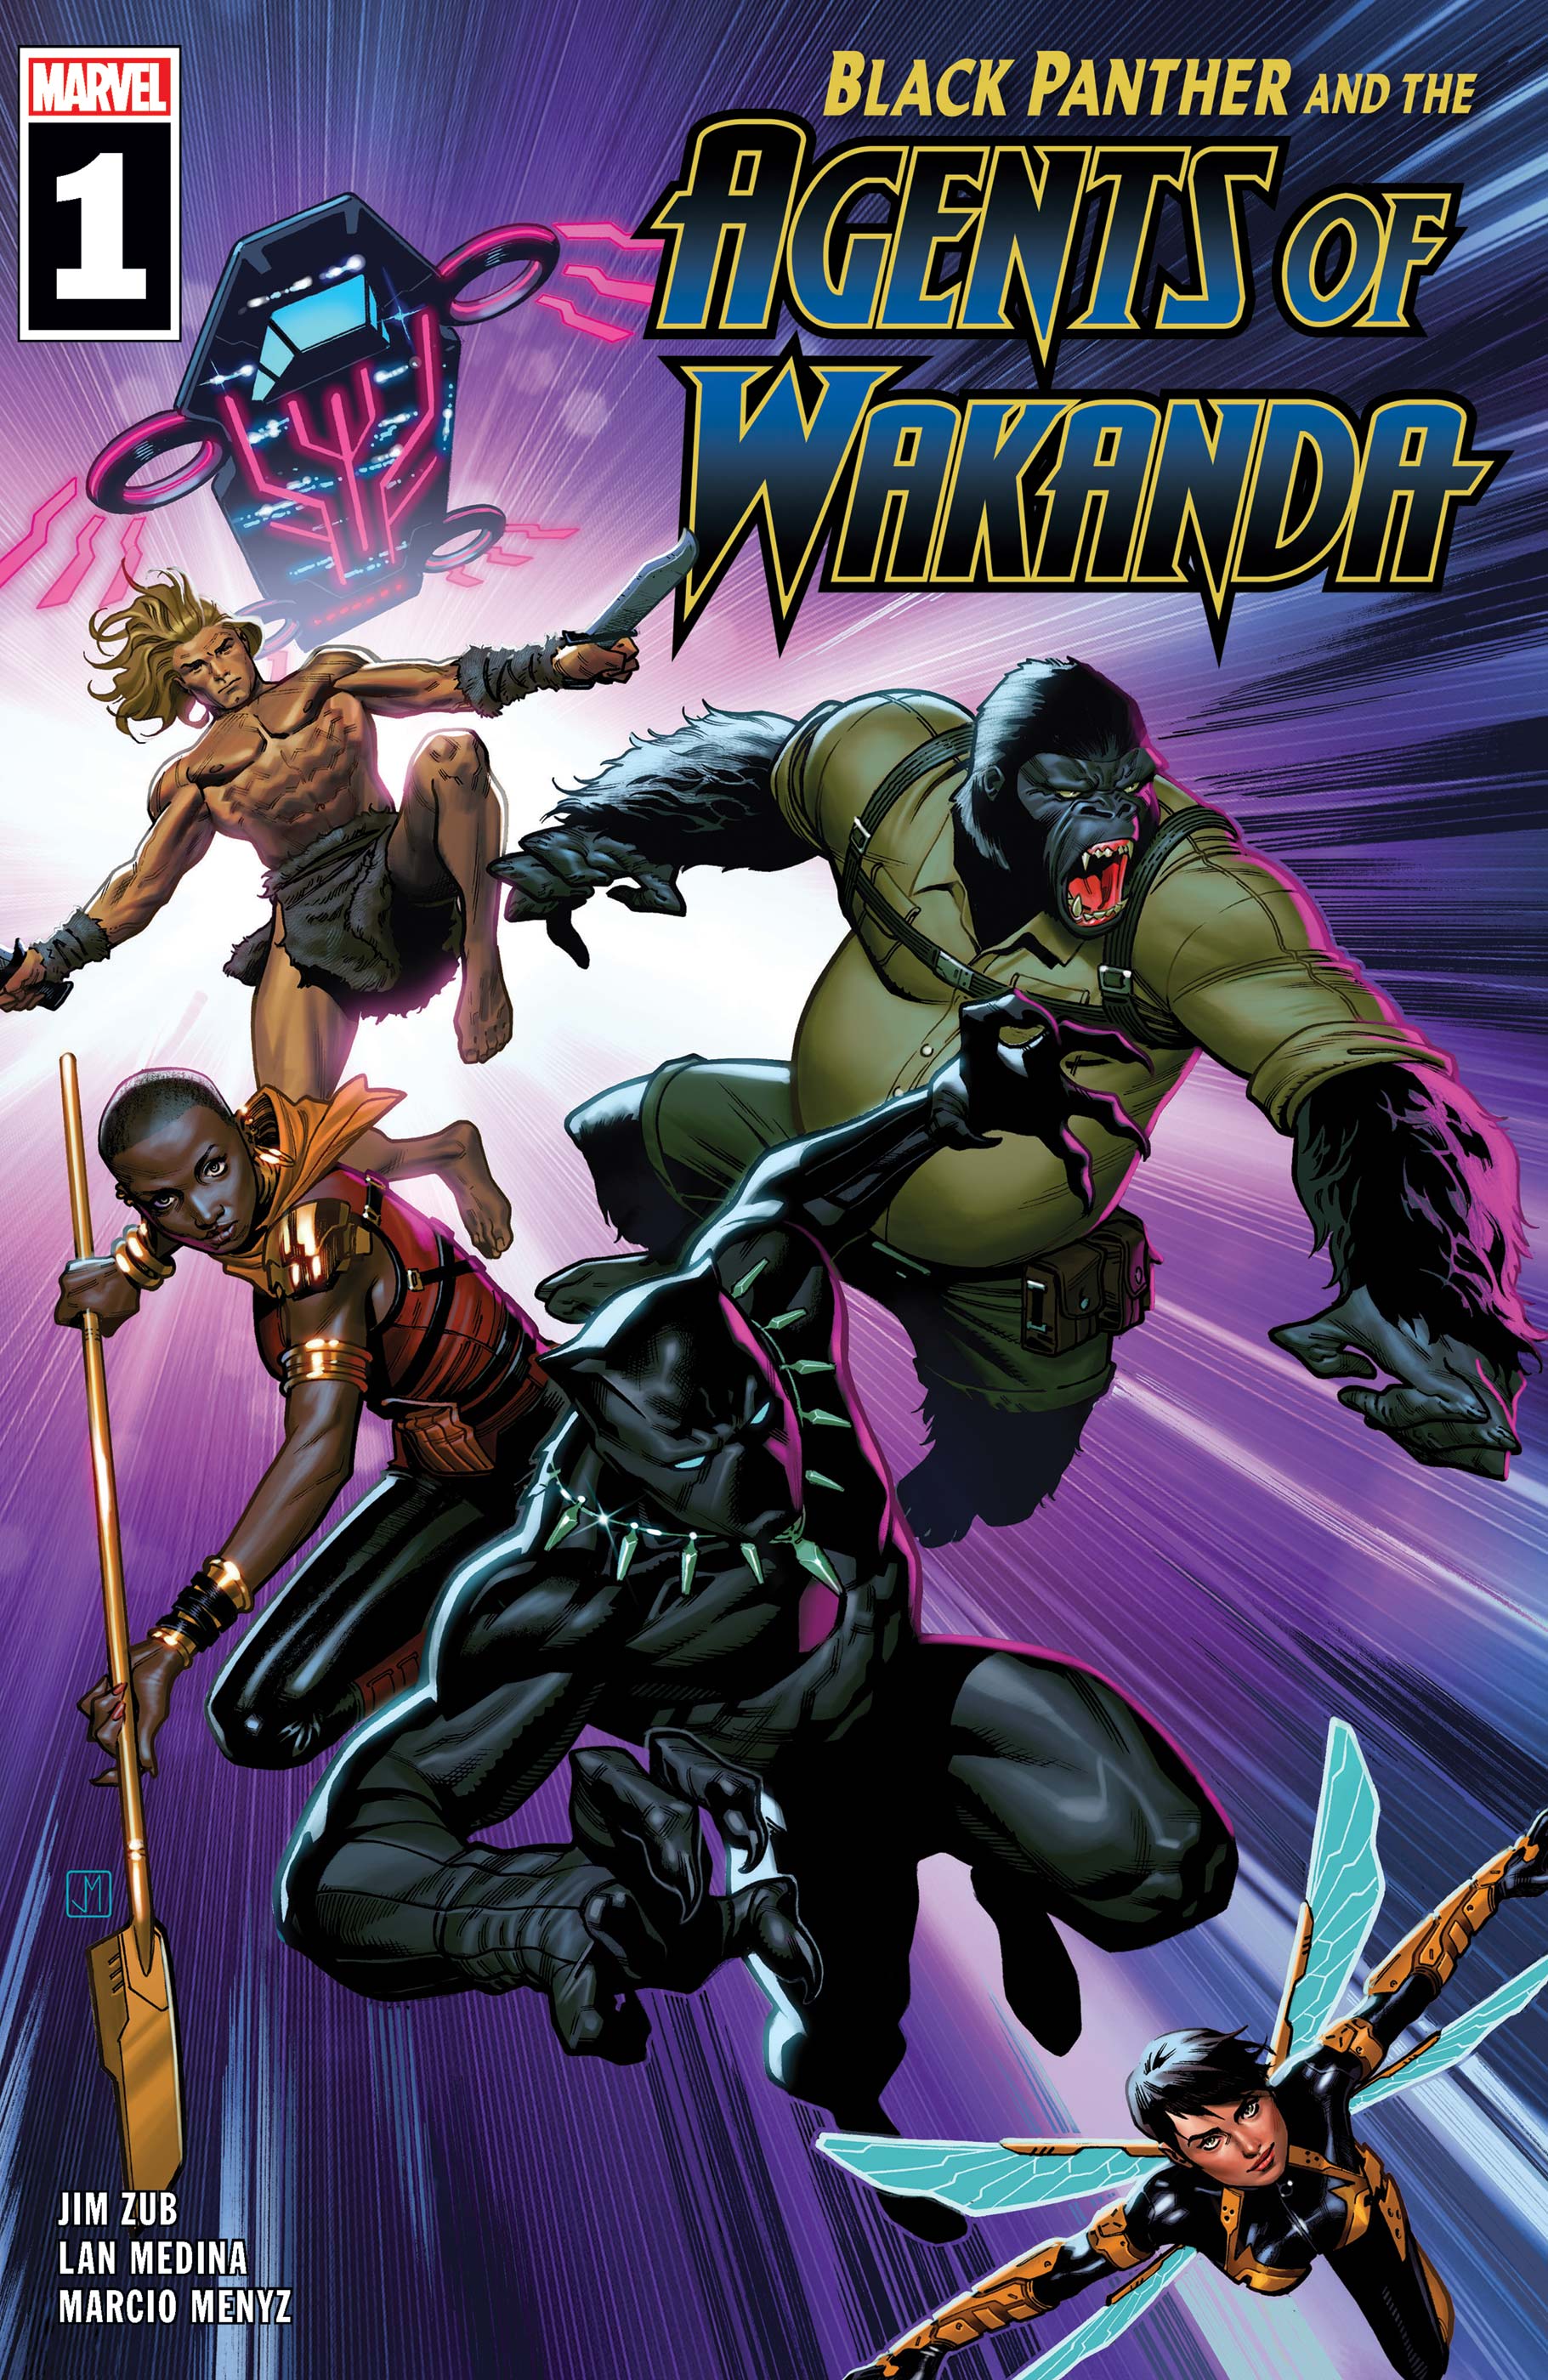 Black Panther and the Agents of Wakanda (2019) #1